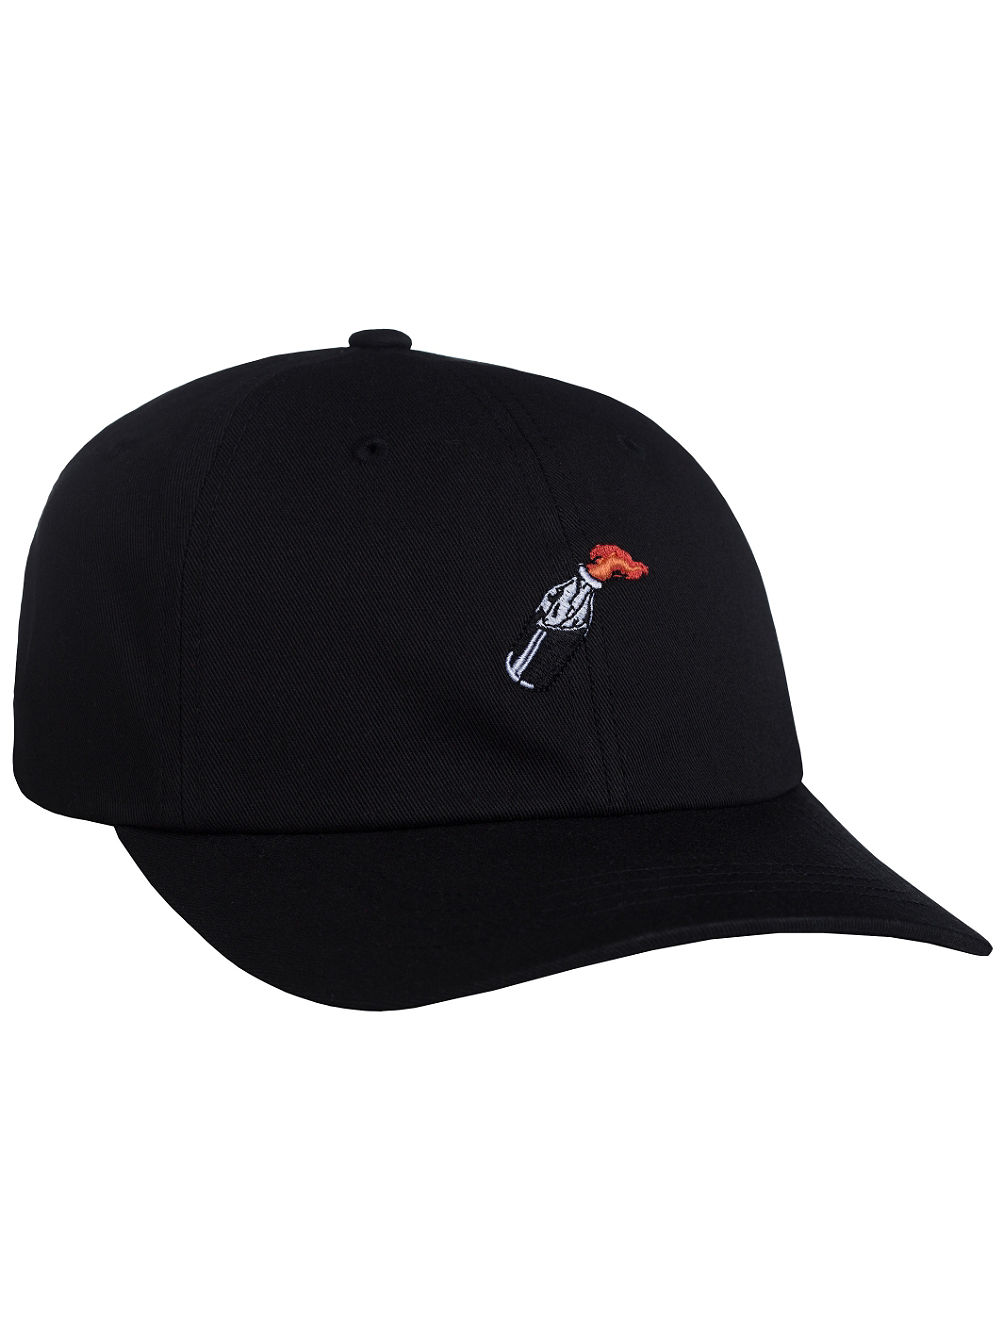 Cocktail Hour Curved Visor 6 Panel Cap